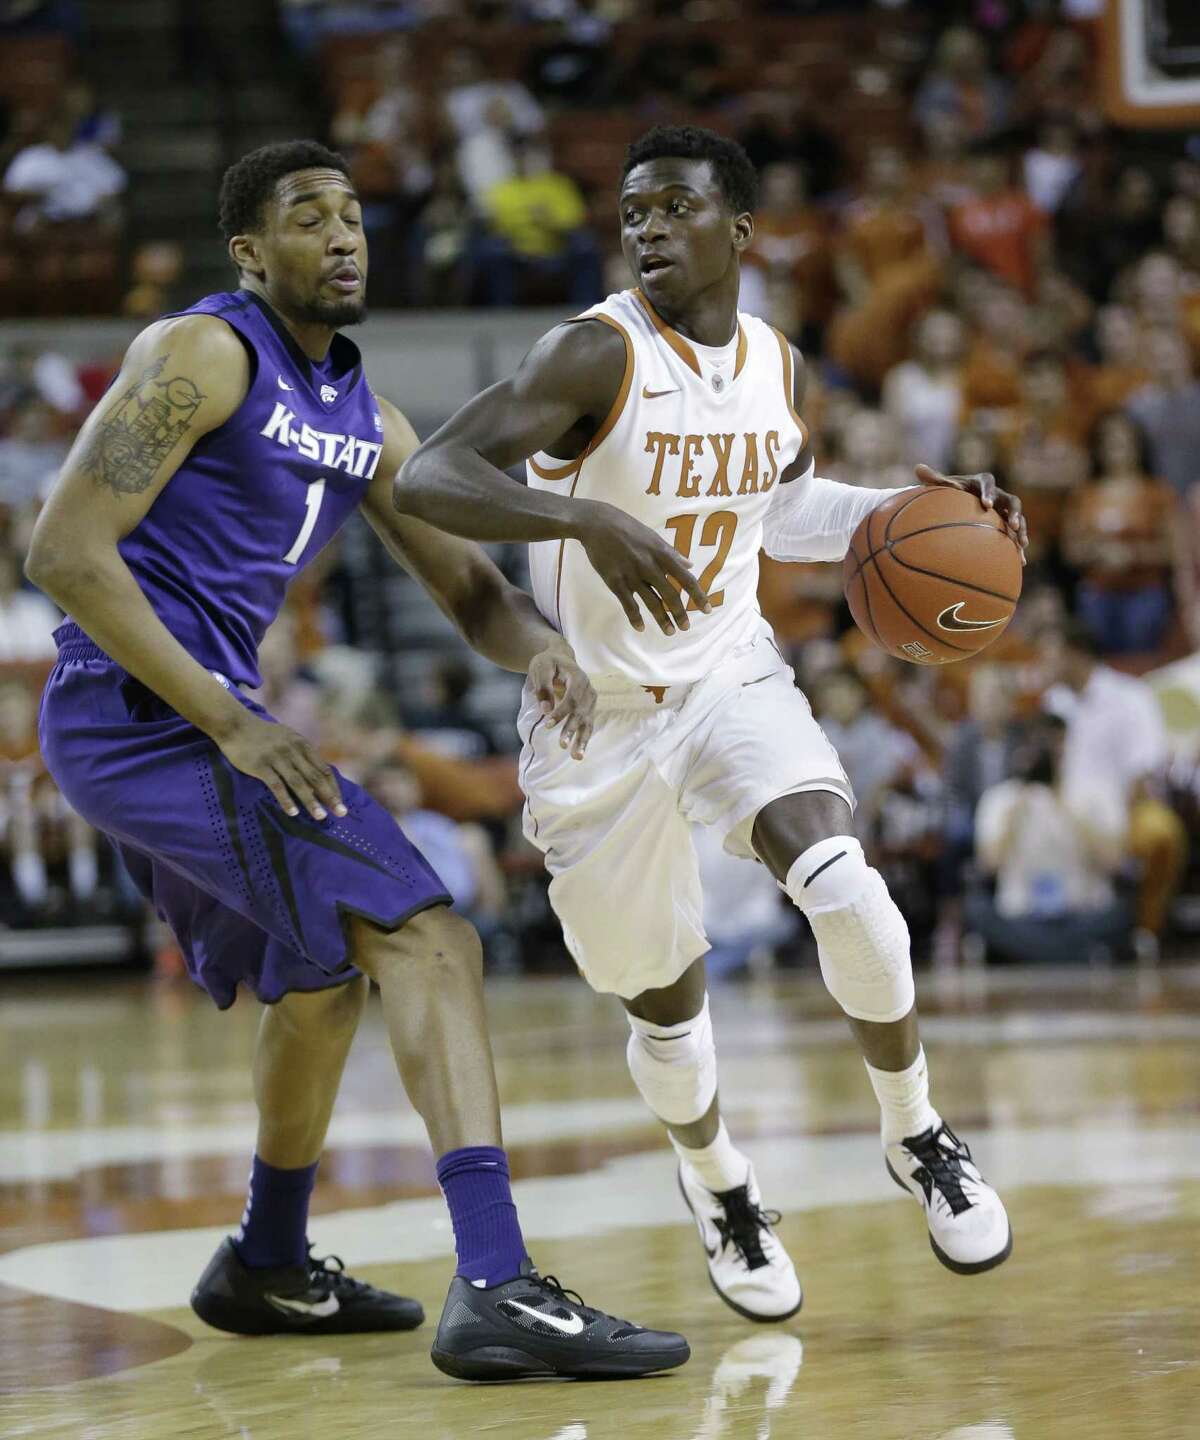 Point guard Myck Kabongo and Texas will face old Southwest Conference foe Houston on Wednesday in the CBI first round.